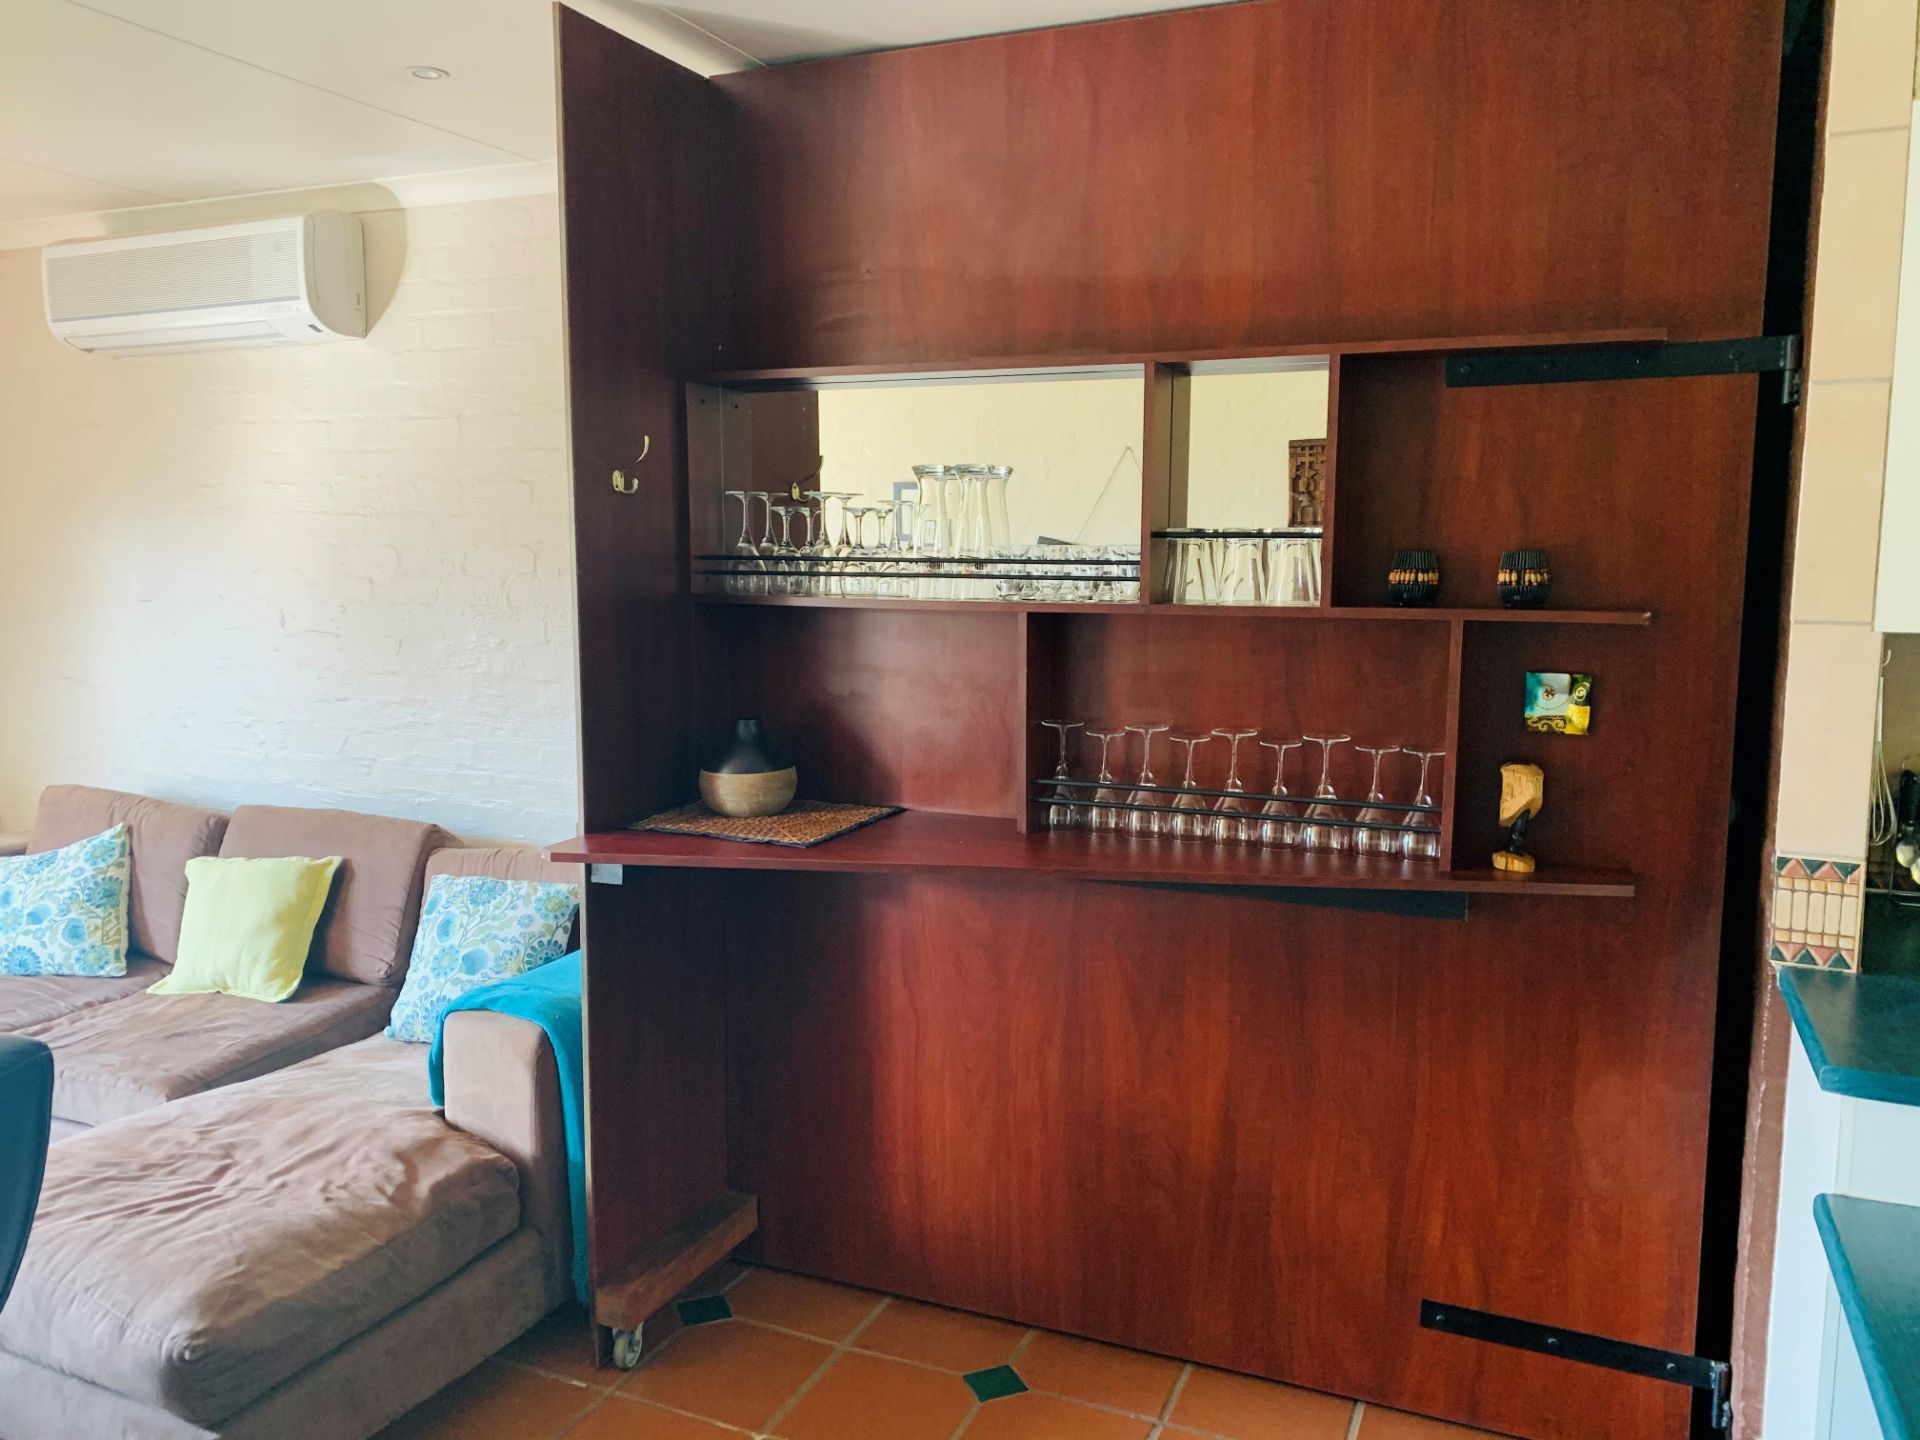 House in Caribbean Beach Club - Cabinet that can also be used as a double bed when turned around.jpg